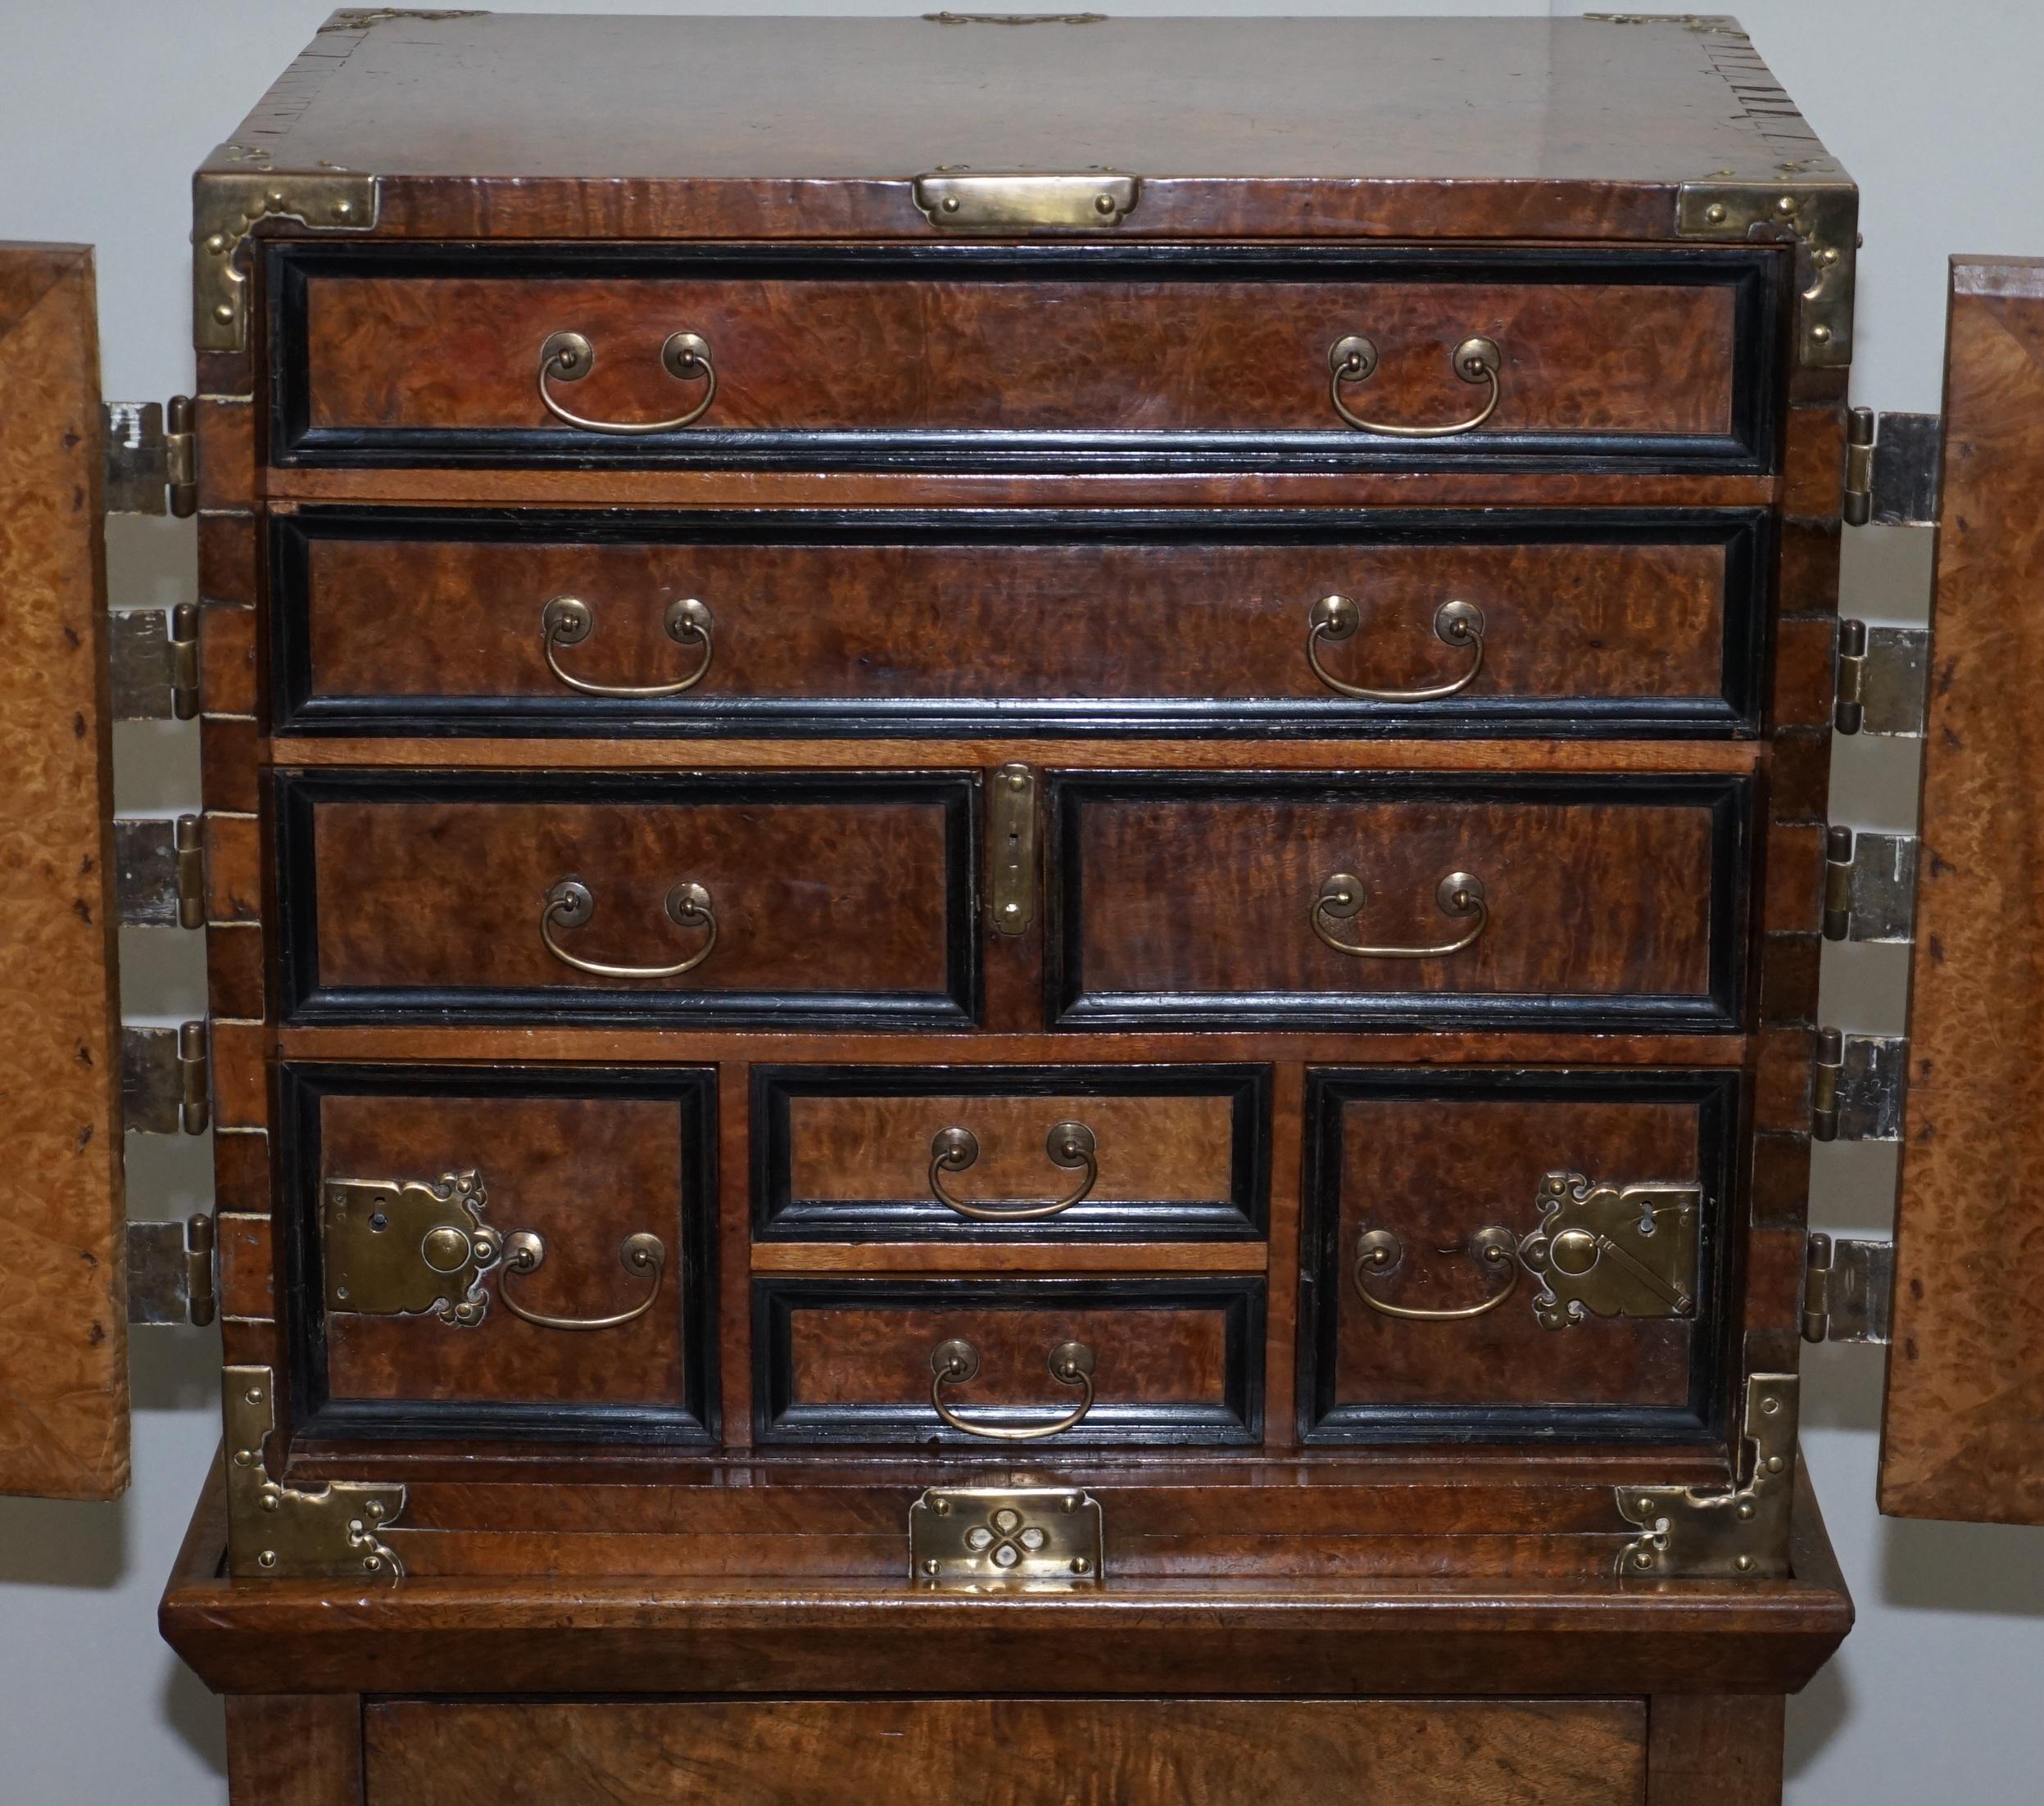 Sublime circa 1740 Portuguese Burr Walnut Campaign Cabinet on Stand Bank Drawers 10